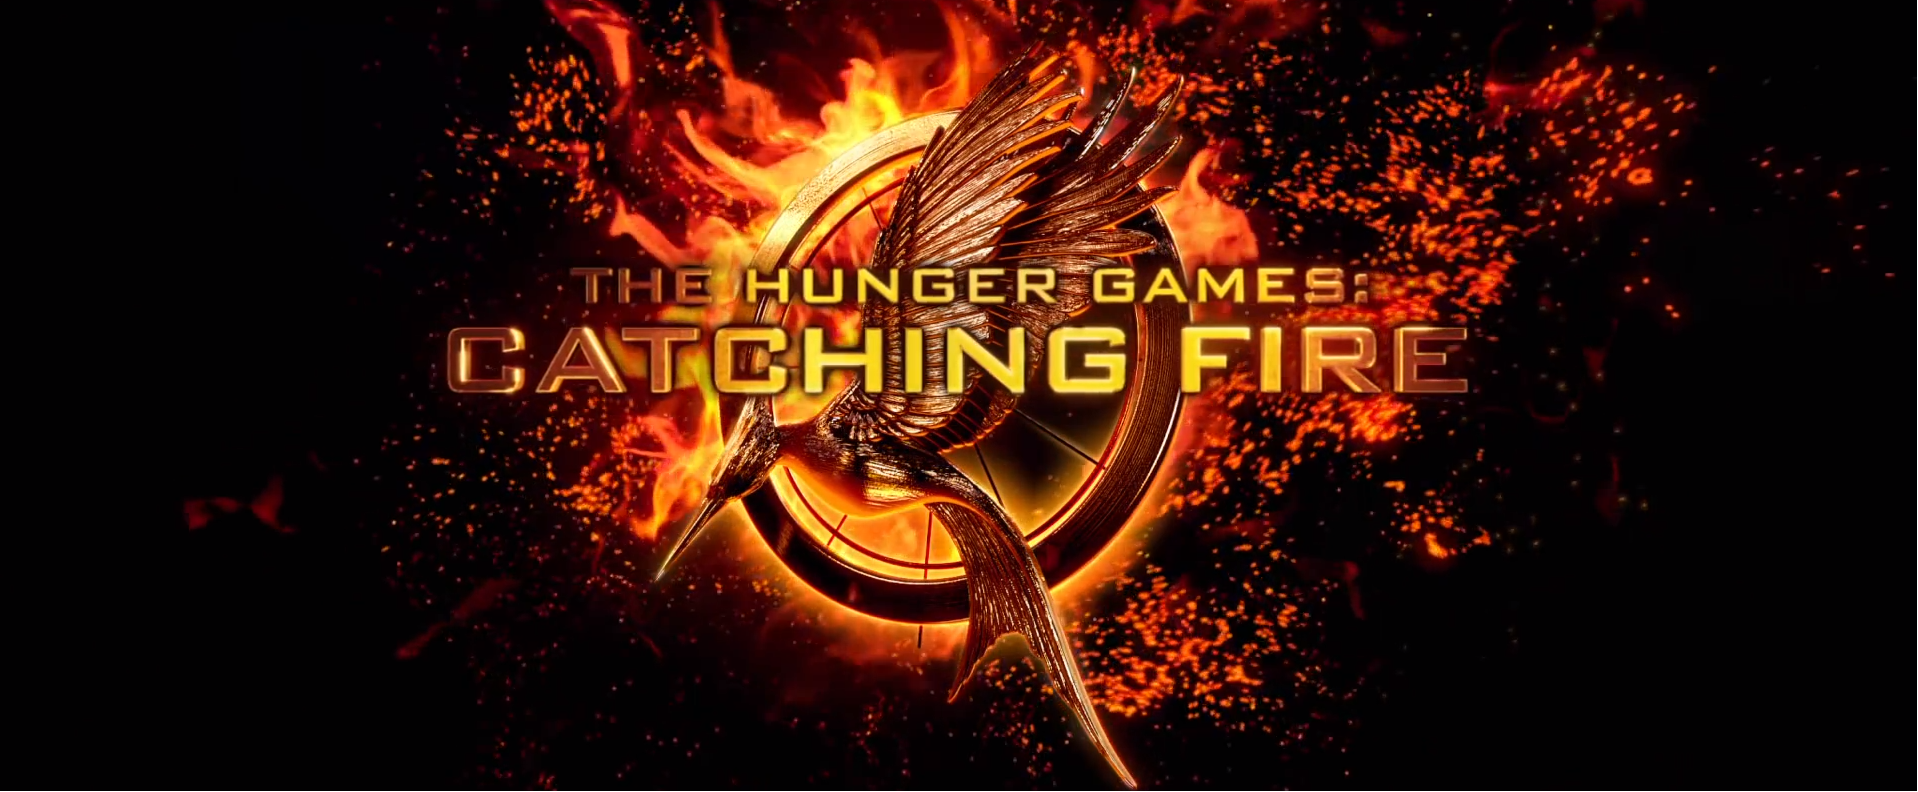 The Hunger Games: Catching Fire for ios download free